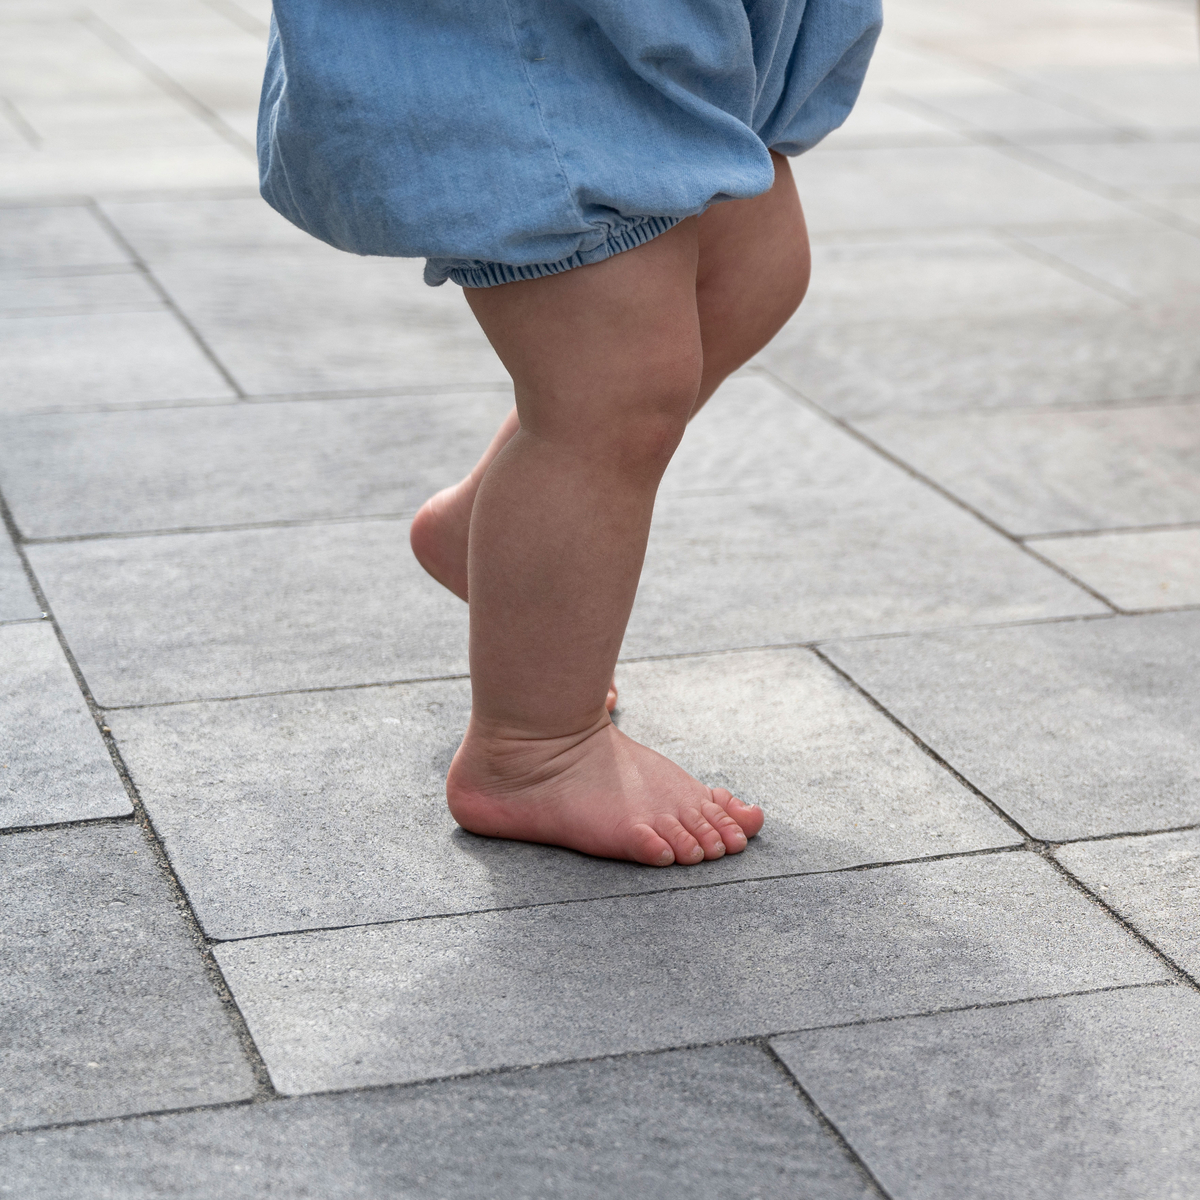 A baby's feet standing on a walkway made of driveway pavers.